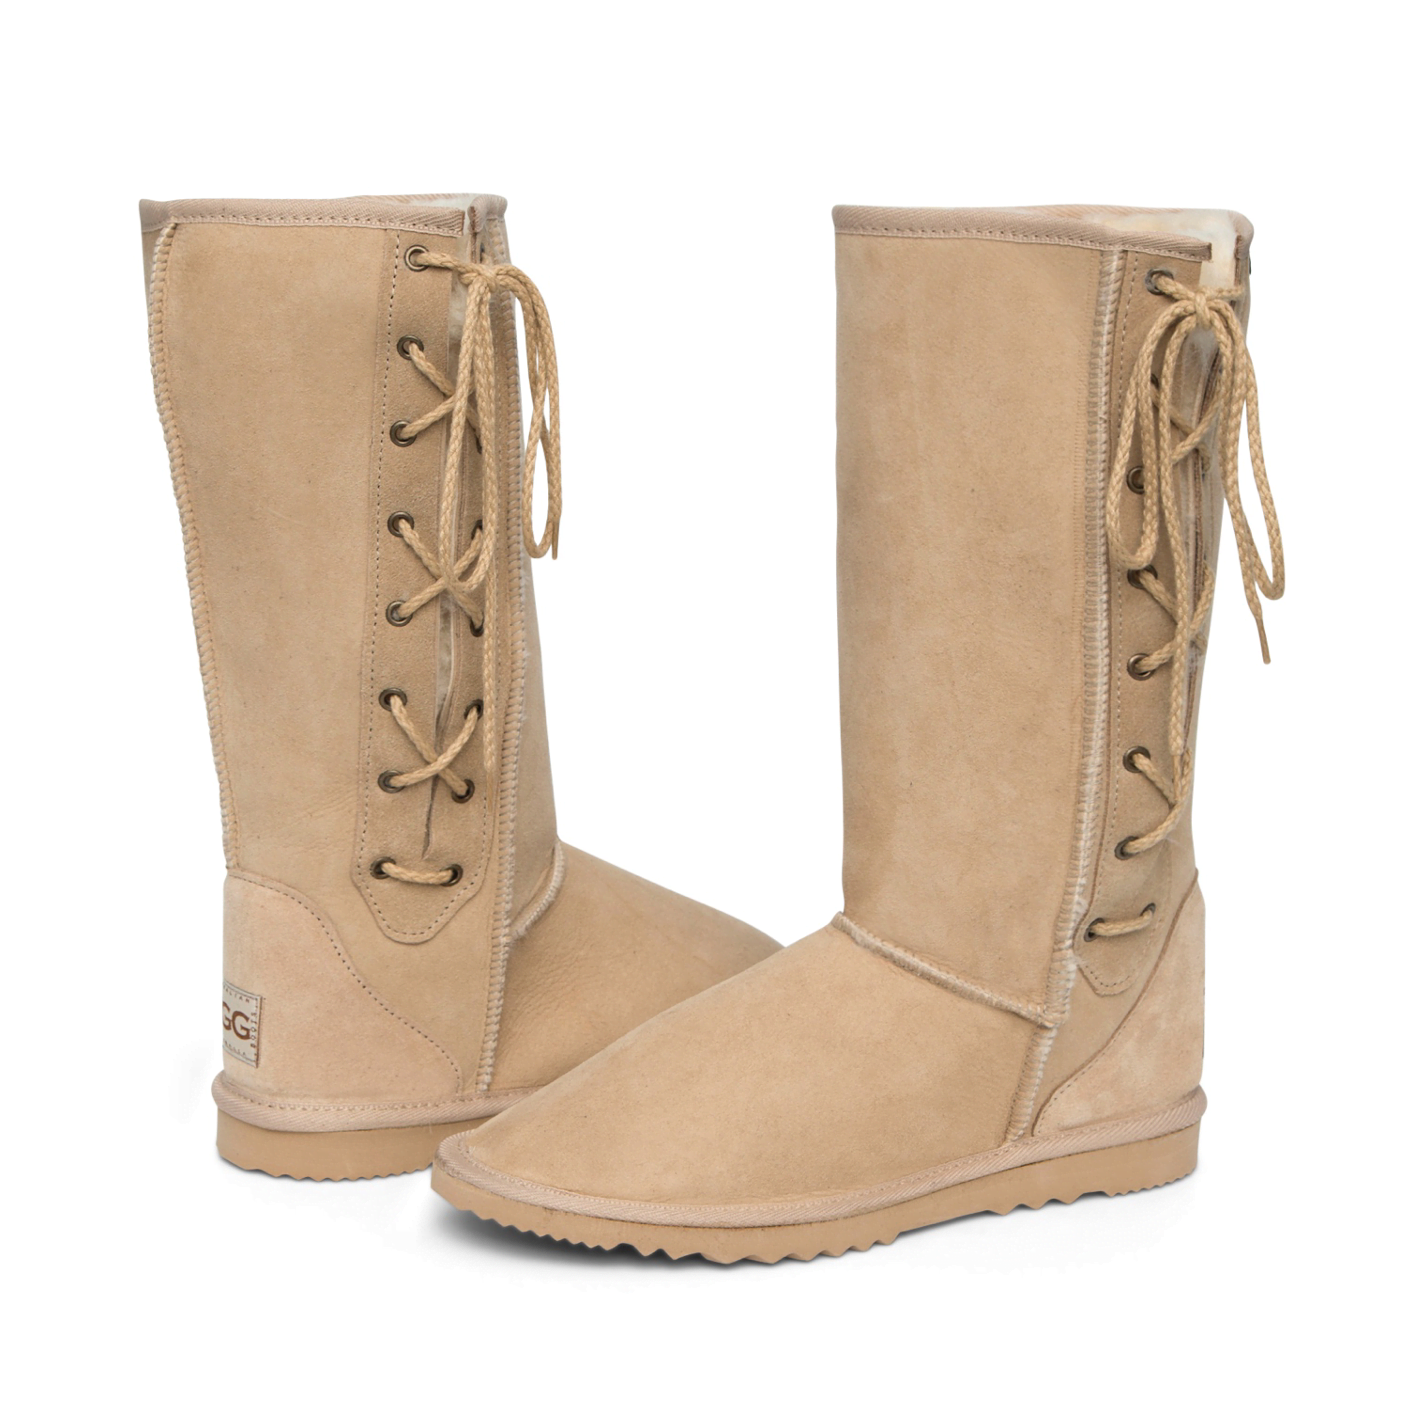 WOMEN'S LACE UP TALL BOOTS